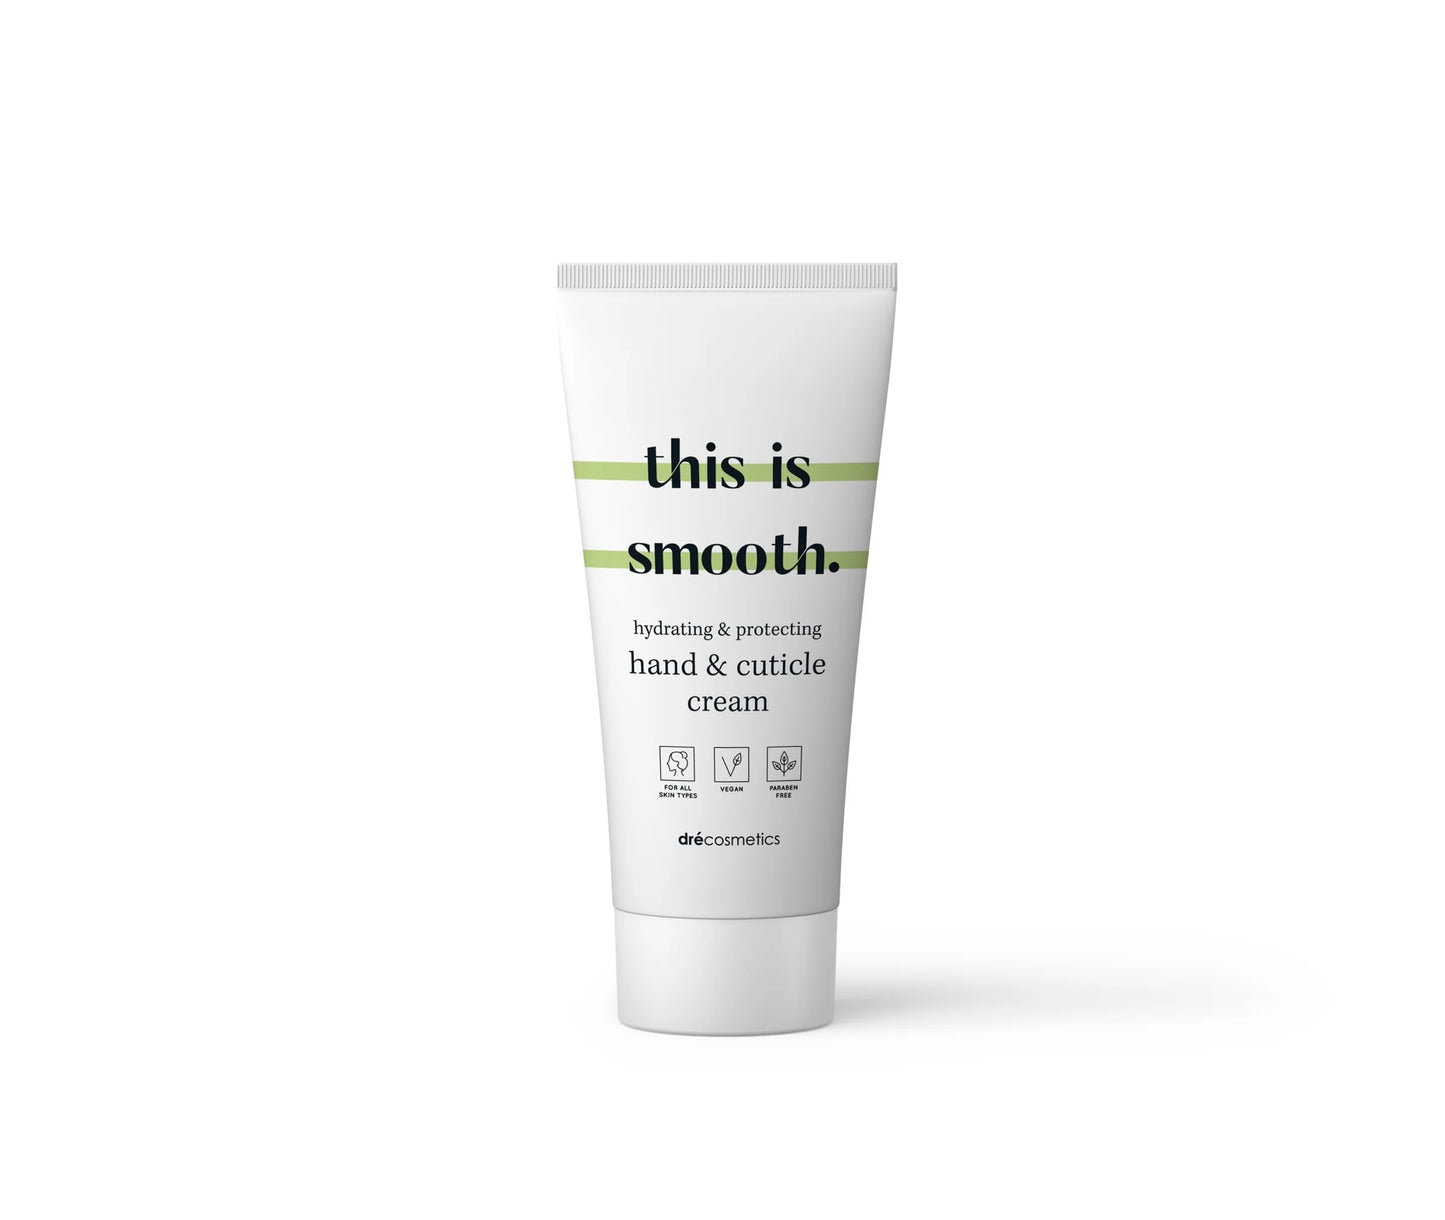 Hand & Cuticle Cream "this is smooth."